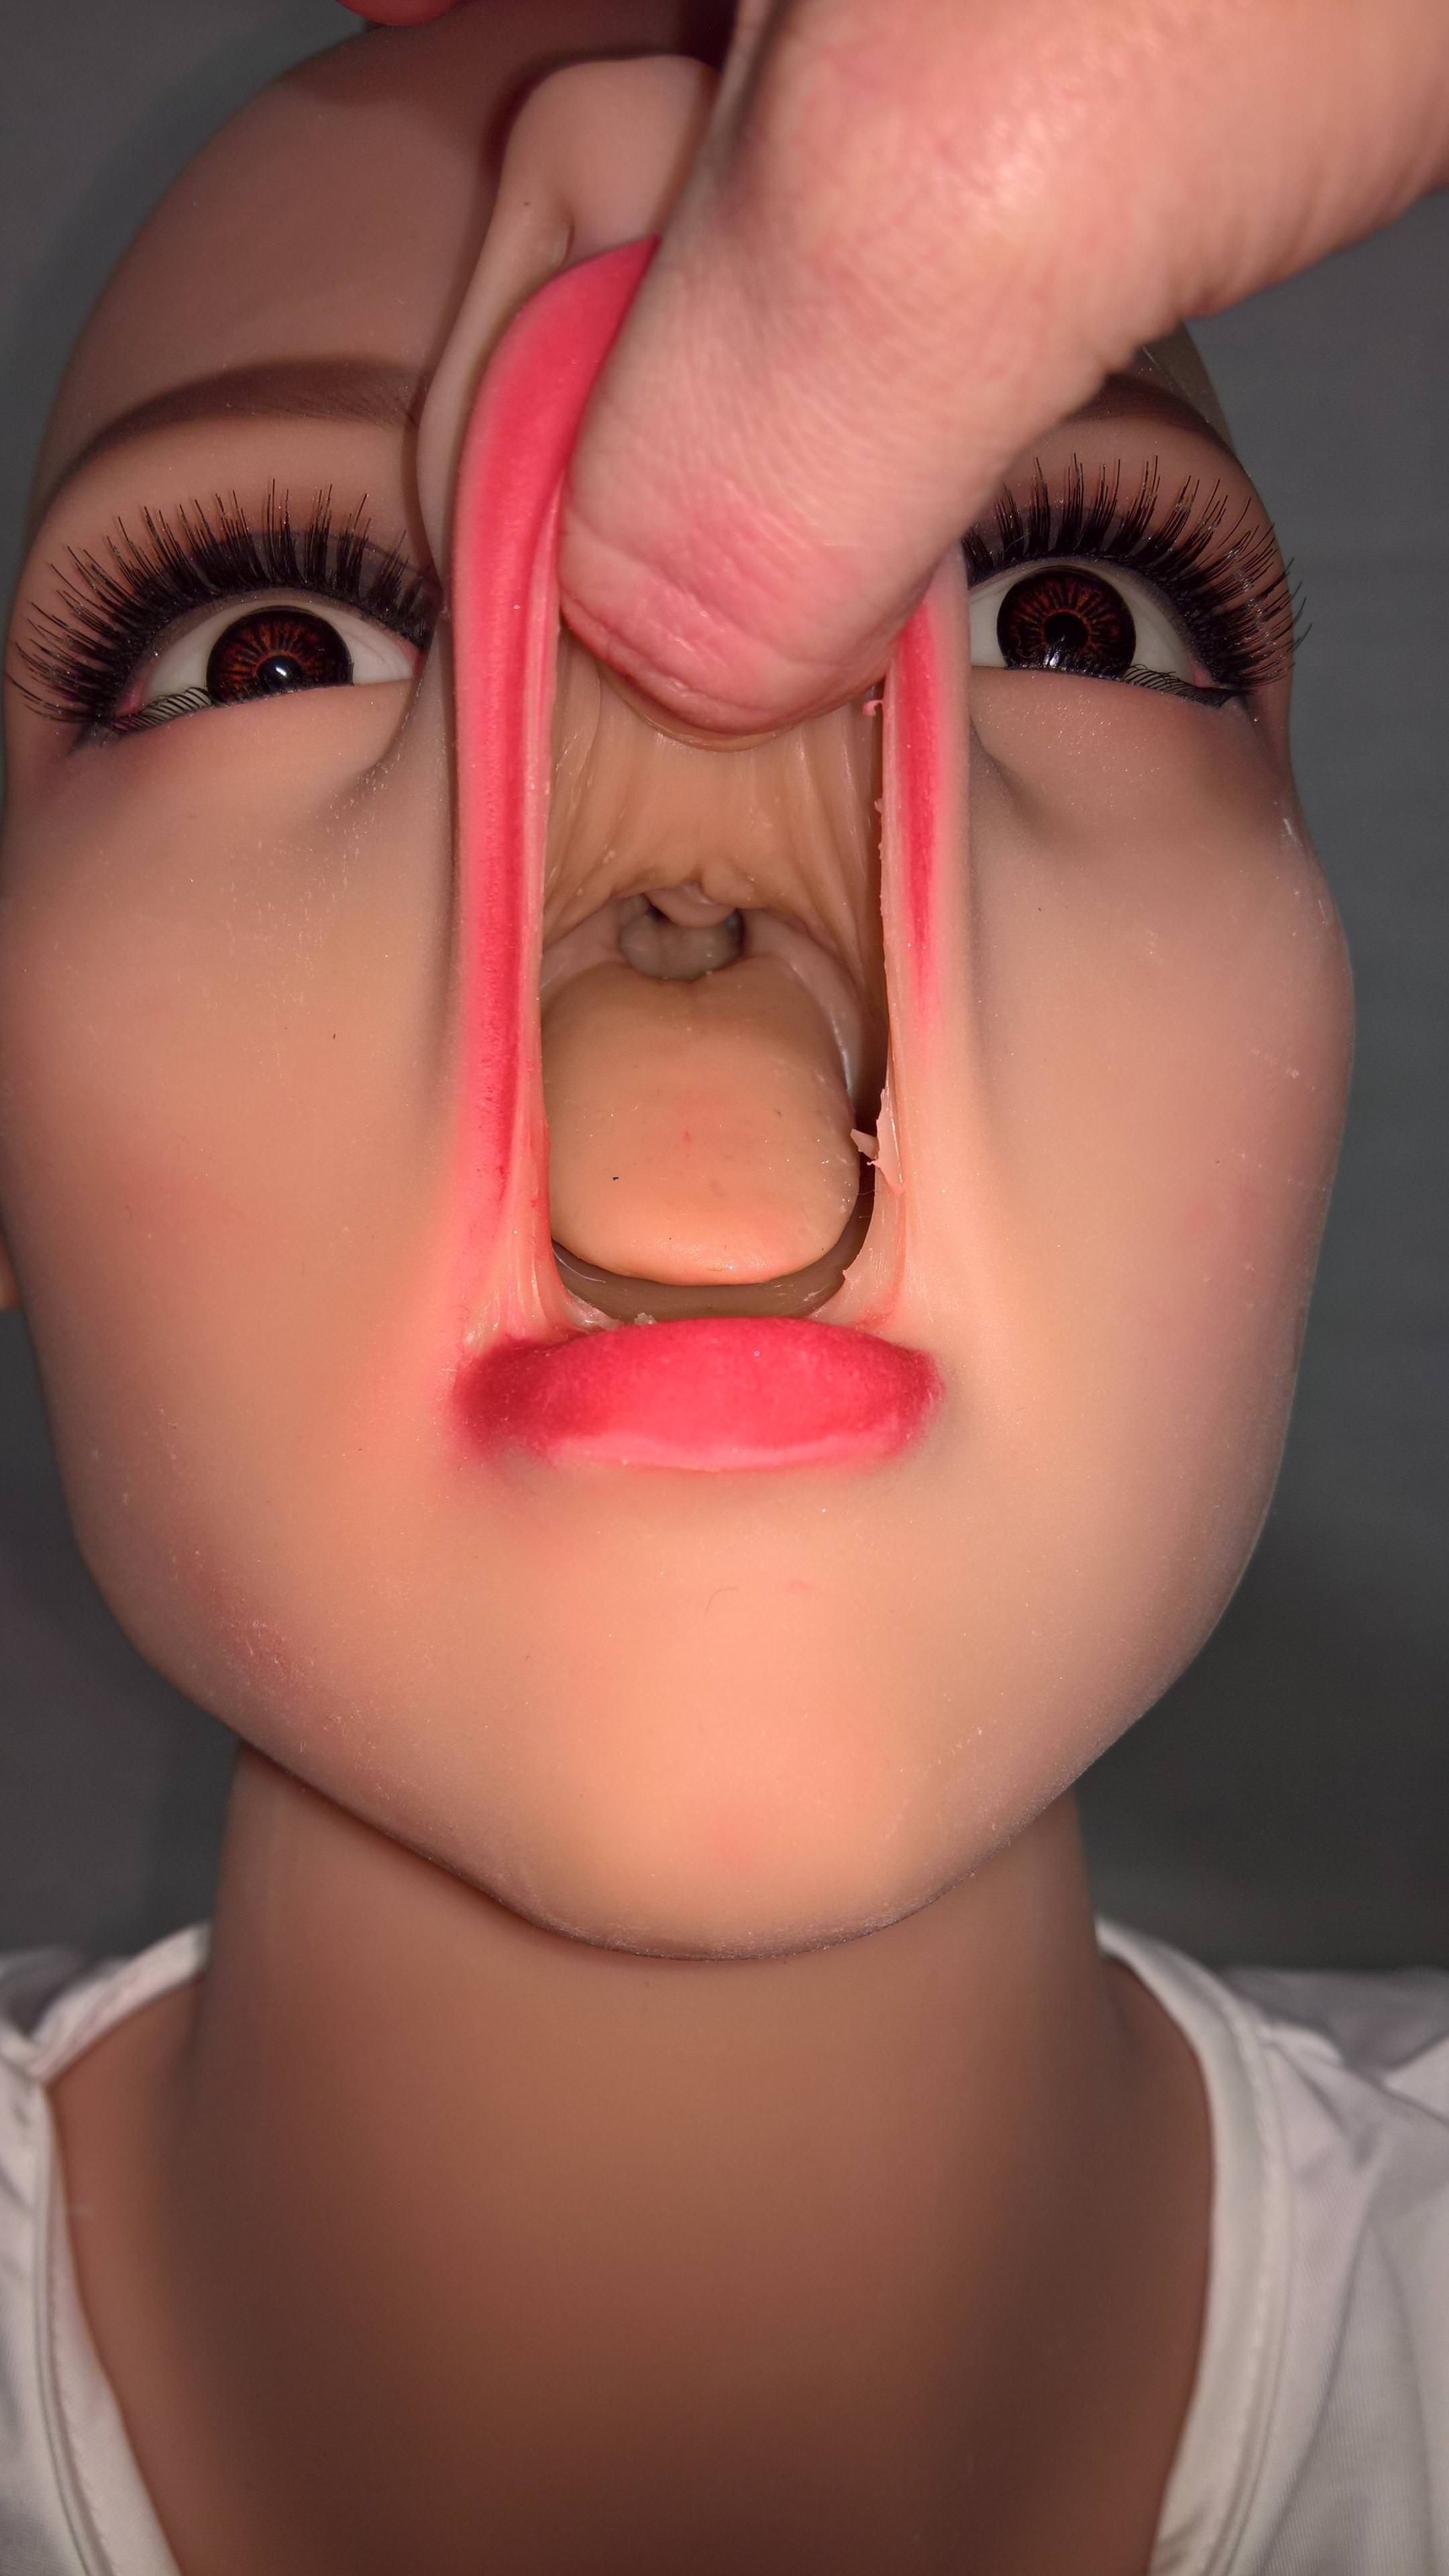 Sex doll with tongue